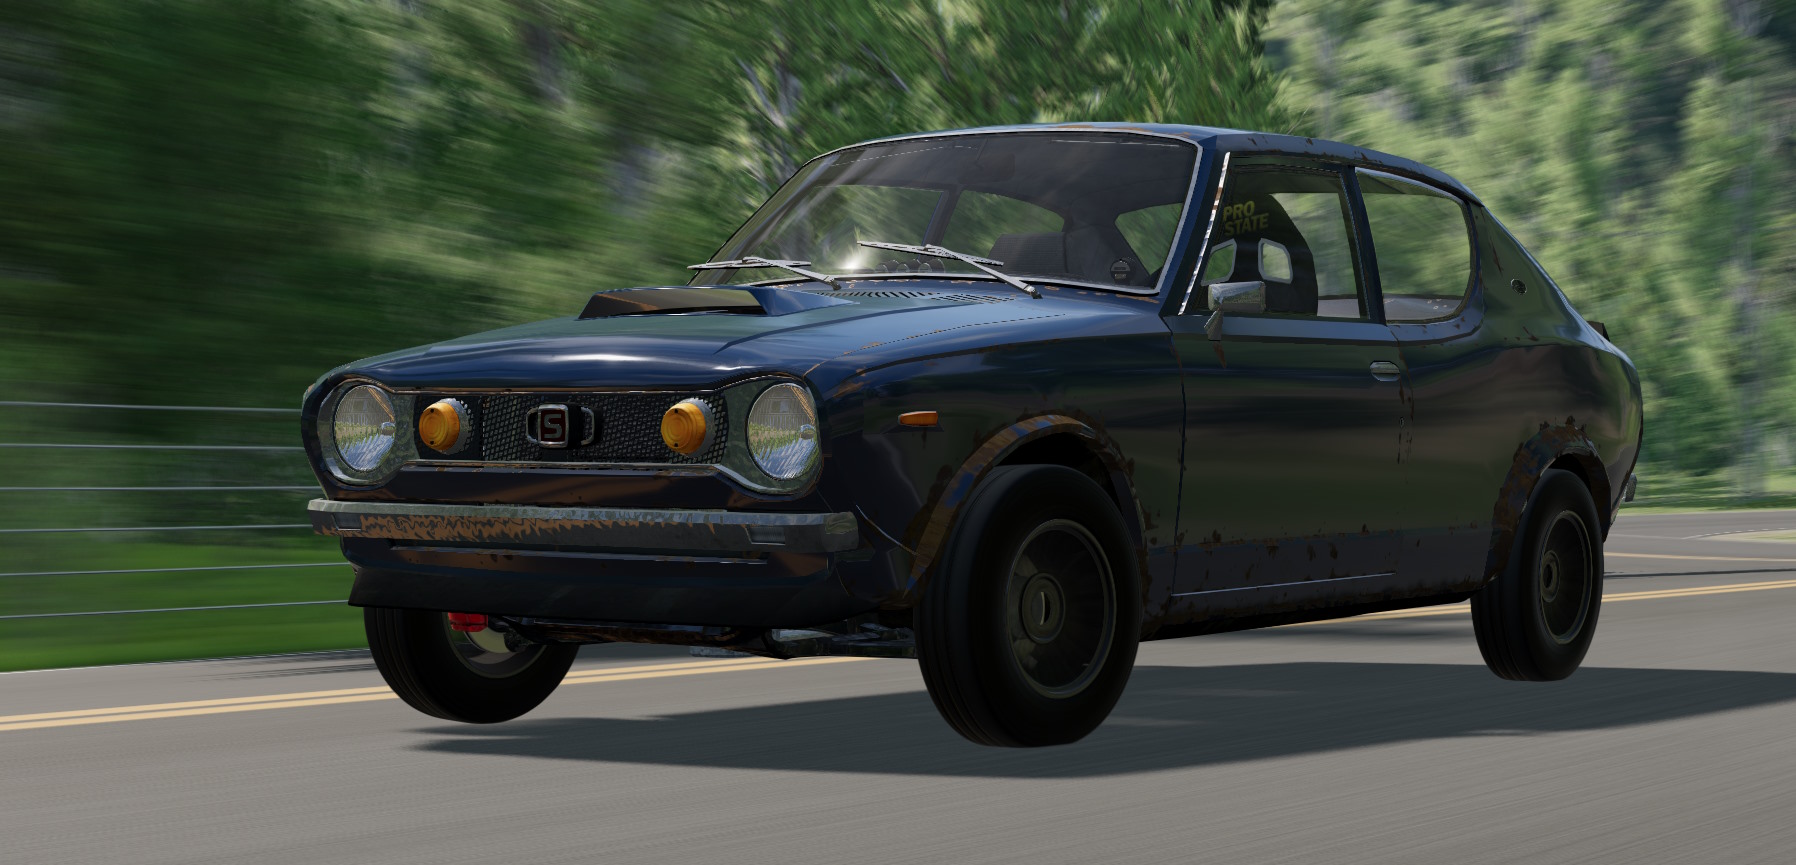 My Summer Car Mods: Best Mods For MSC (And Download Links)